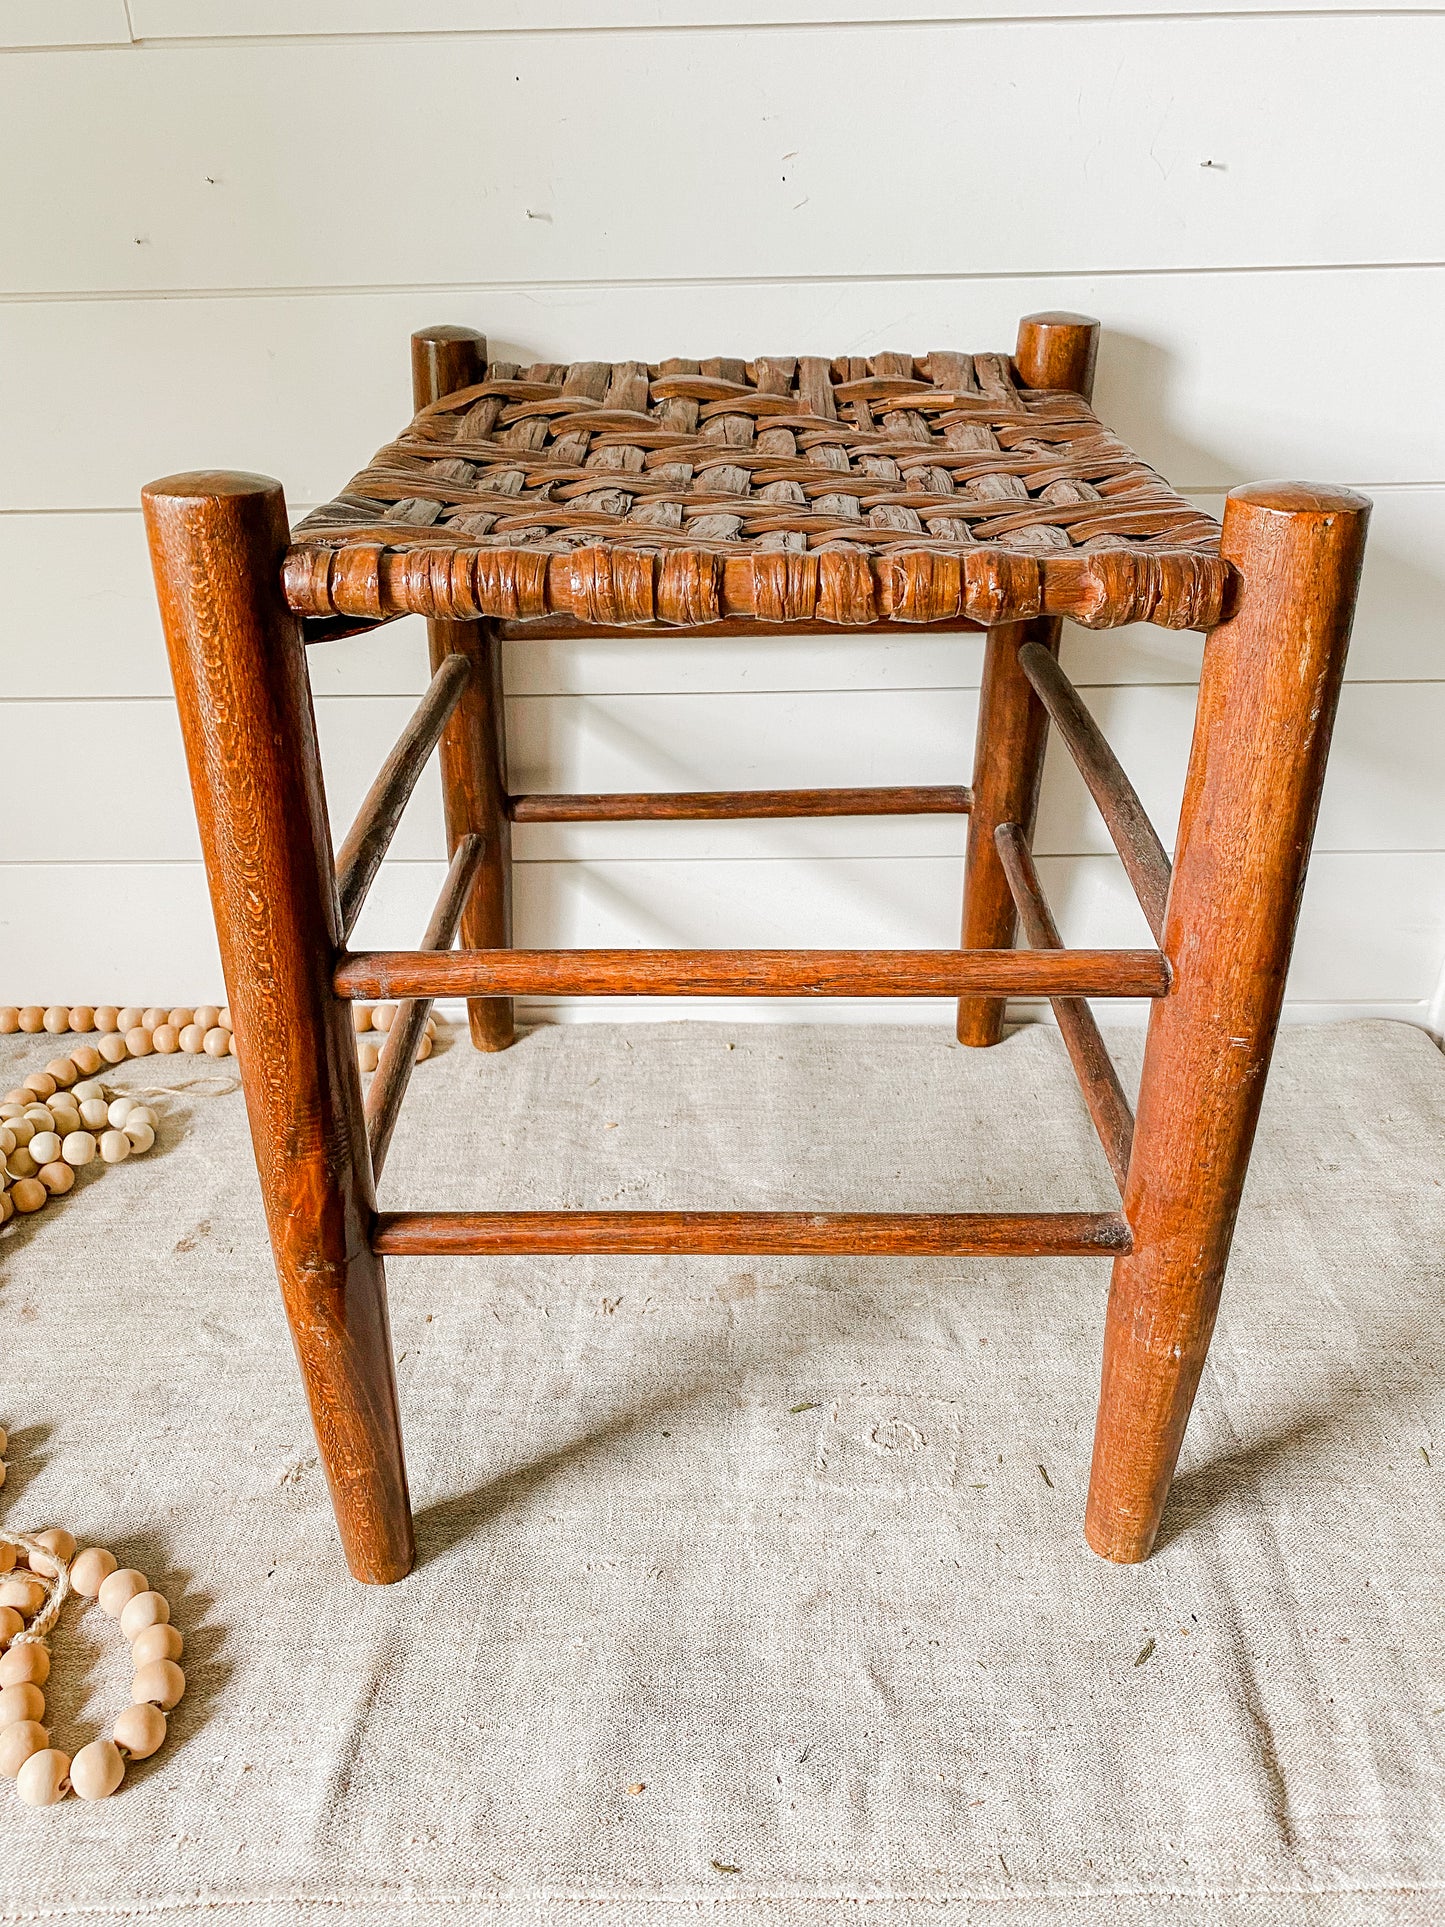 Vintage Handmade Shaker Style 18" Tall Stool with Woven Split Wood Seat | Rustic Farmhouse Plant Stand